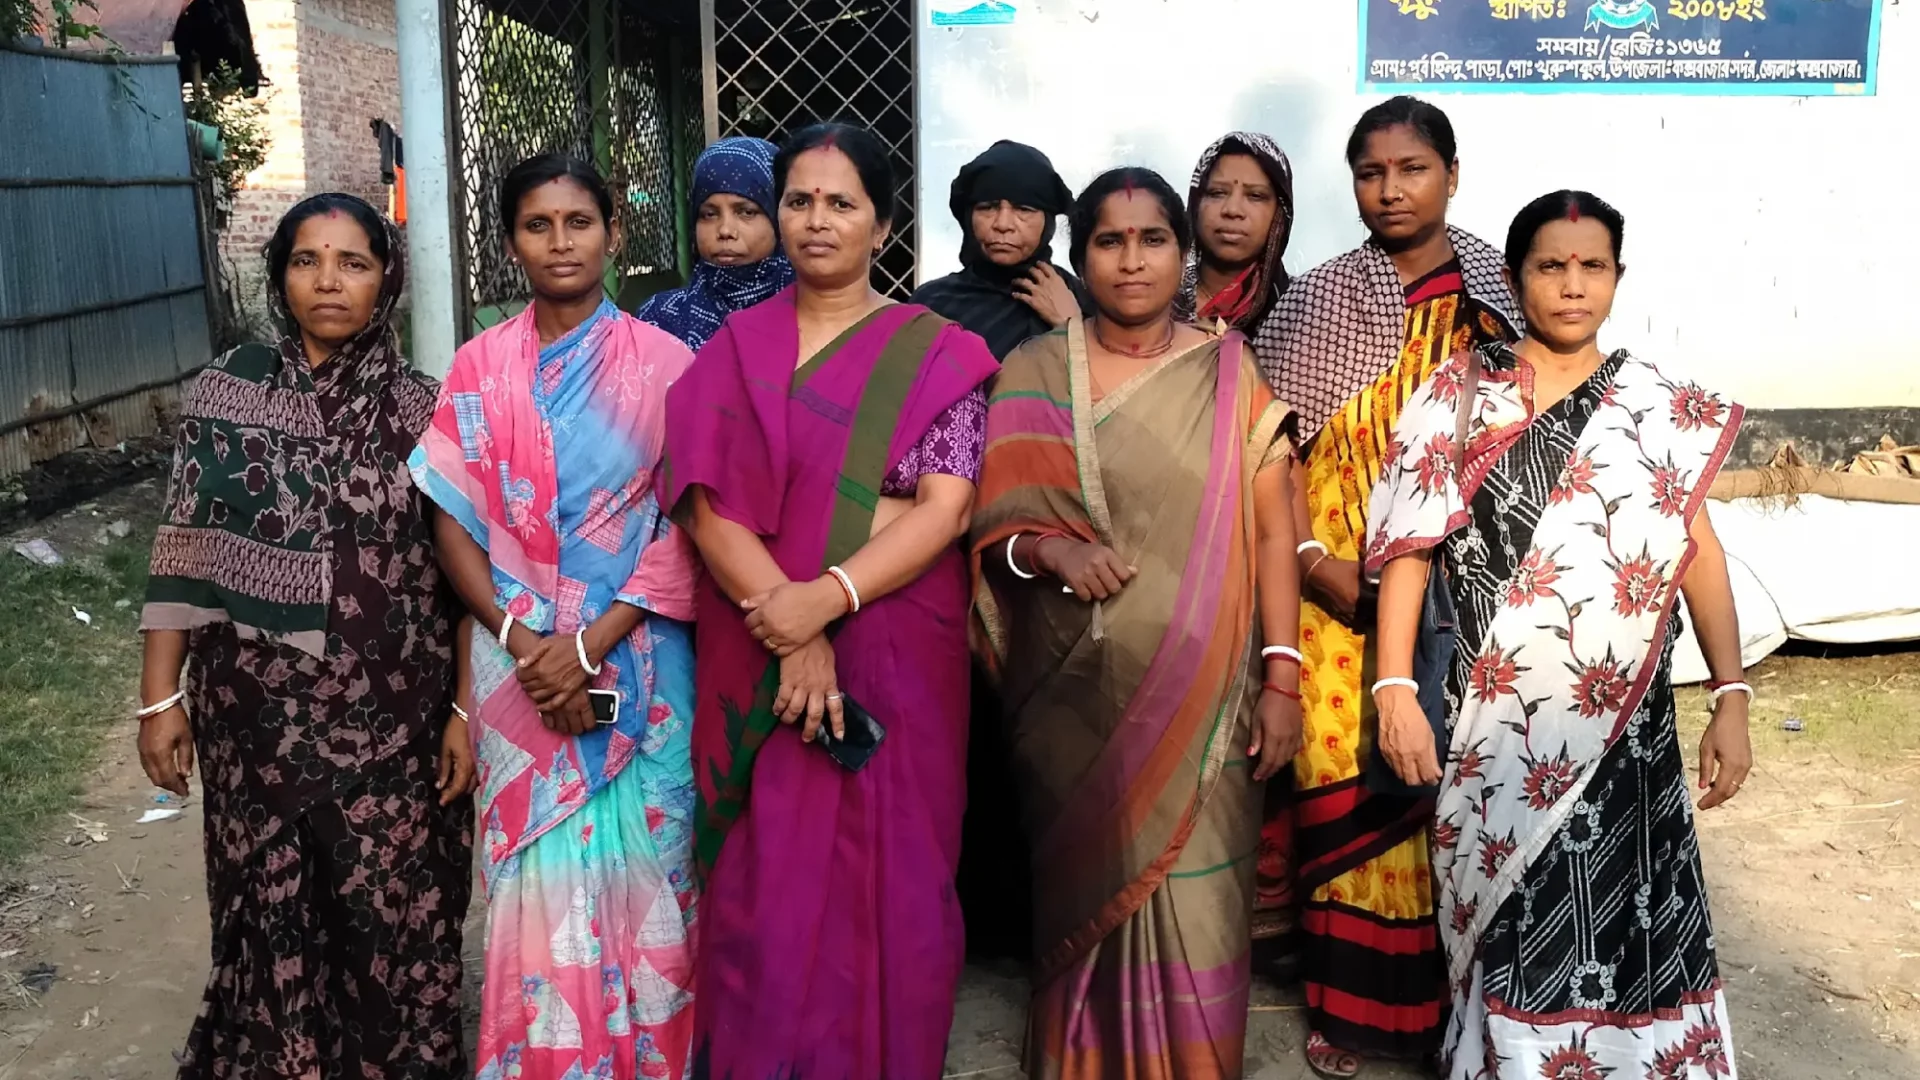 Representatives and members of a women-led organization attending the due diligence process